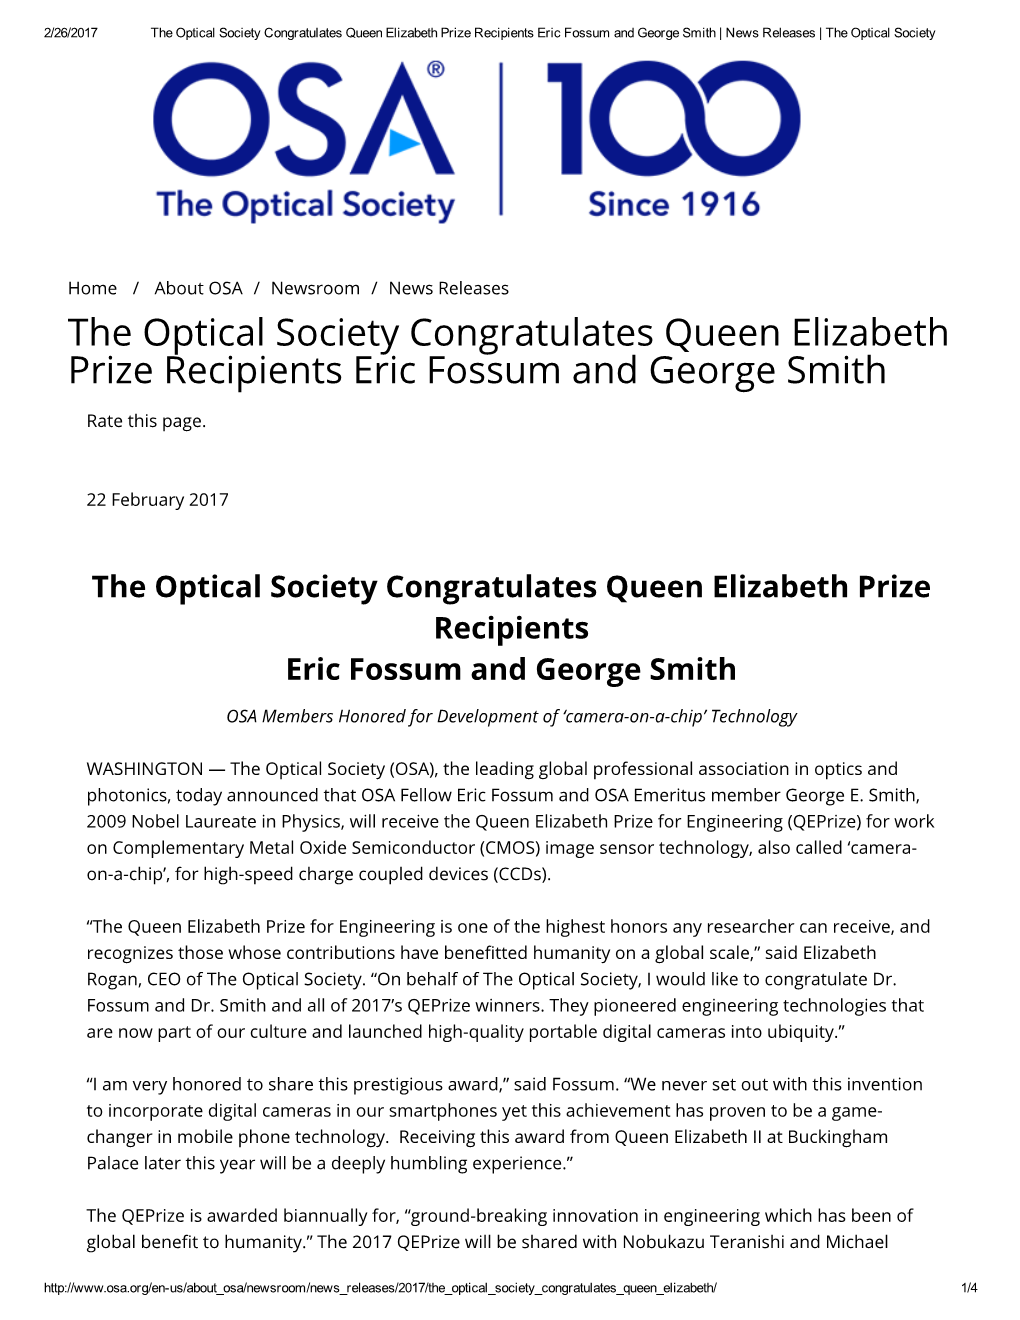 The Optical Society Congratulates Queen Elizabeth Prize Recipients Eric Fossum and George Smith | News Releases | the Optical Society